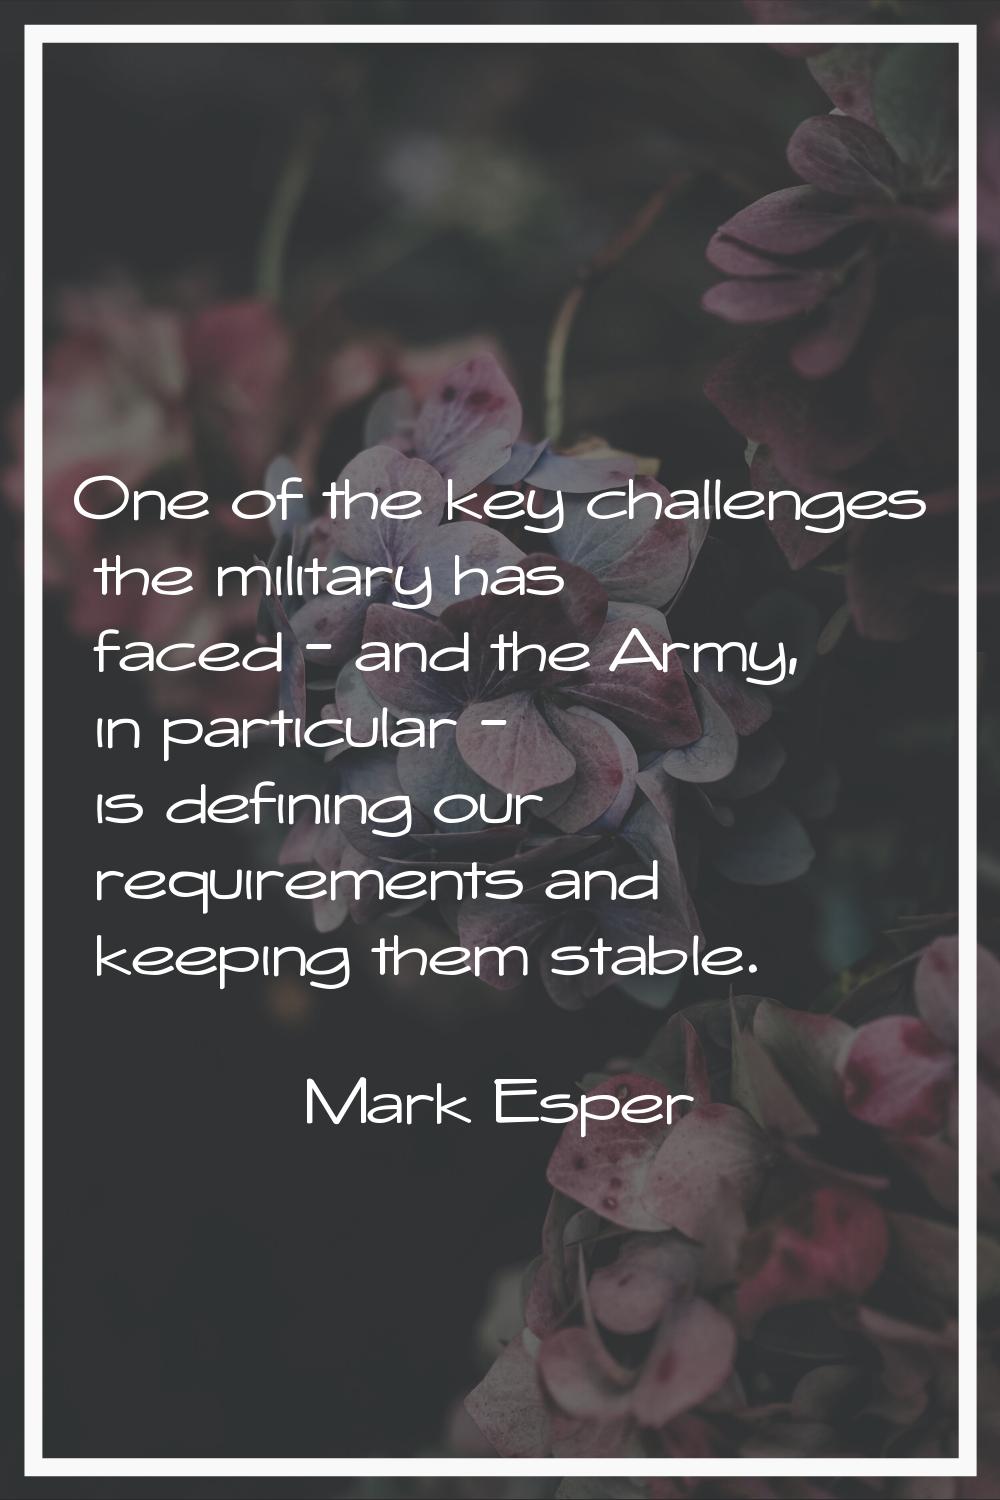 One of the key challenges the military has faced - and the Army, in particular - is defining our re